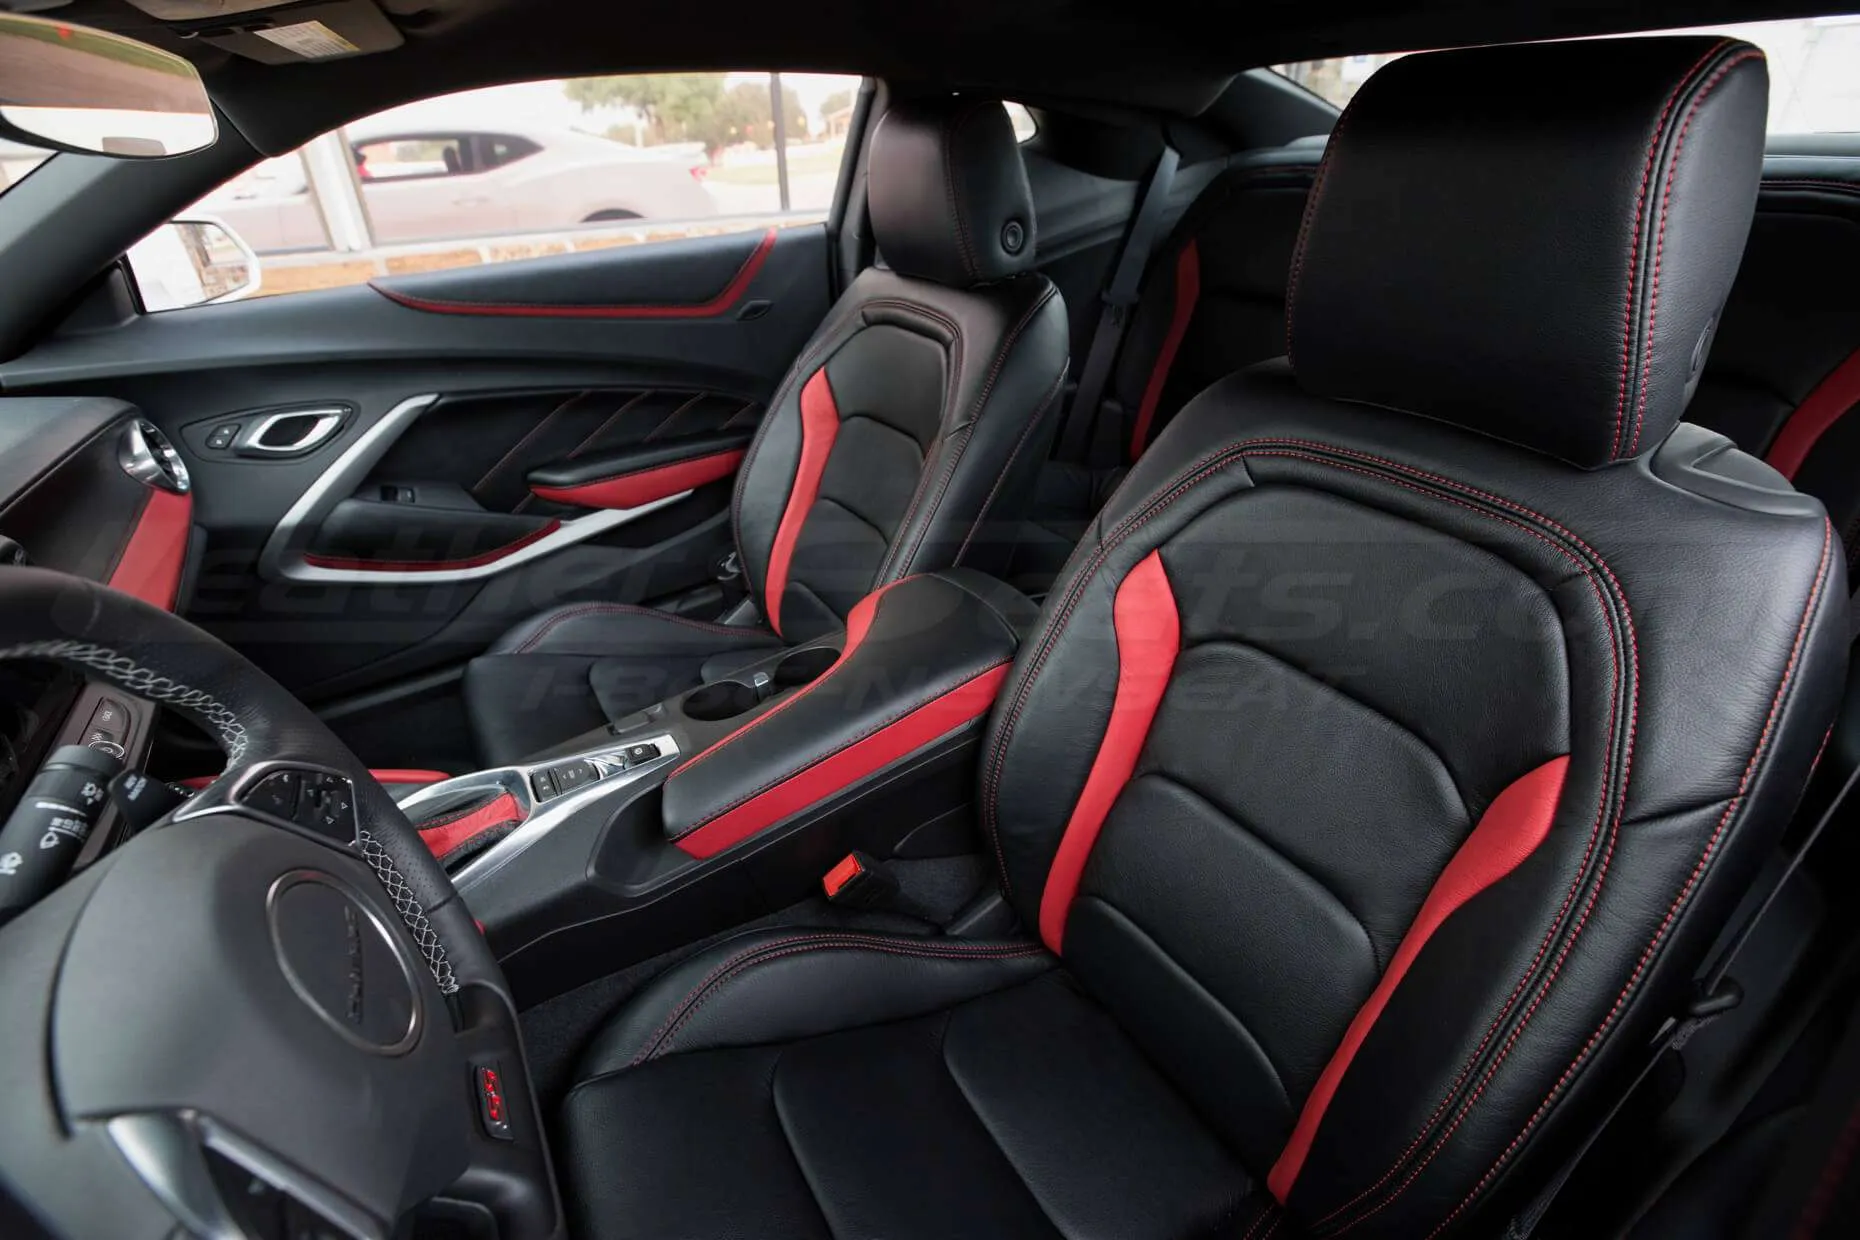 Installed Chevrolet Camaro Leather Seats - Black w/ Bright red Wings - Front backrest up